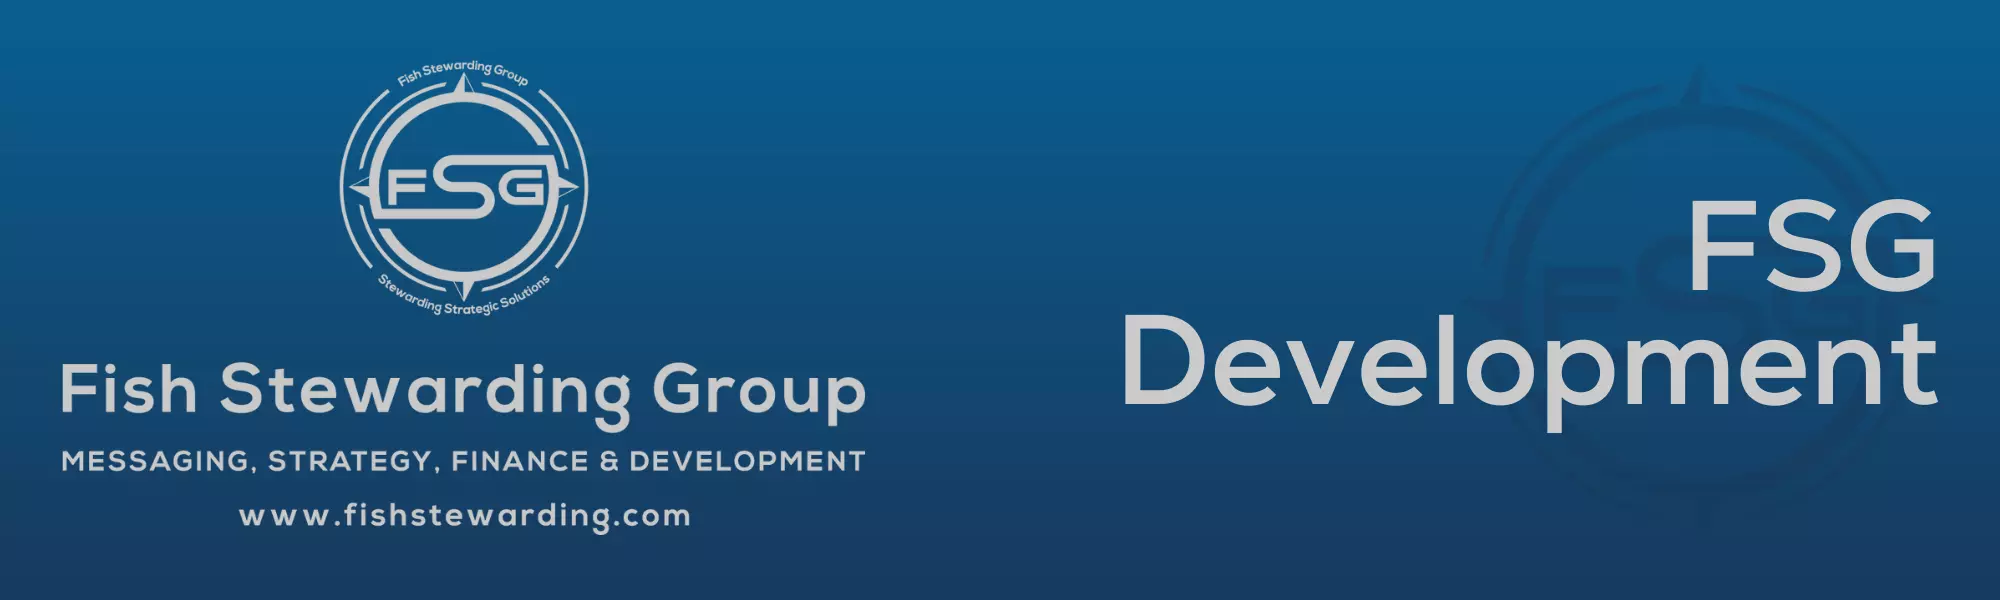 Fish Stewarding Group Footer Image with a blue background, the FSG logo watermark and the title FSG Development